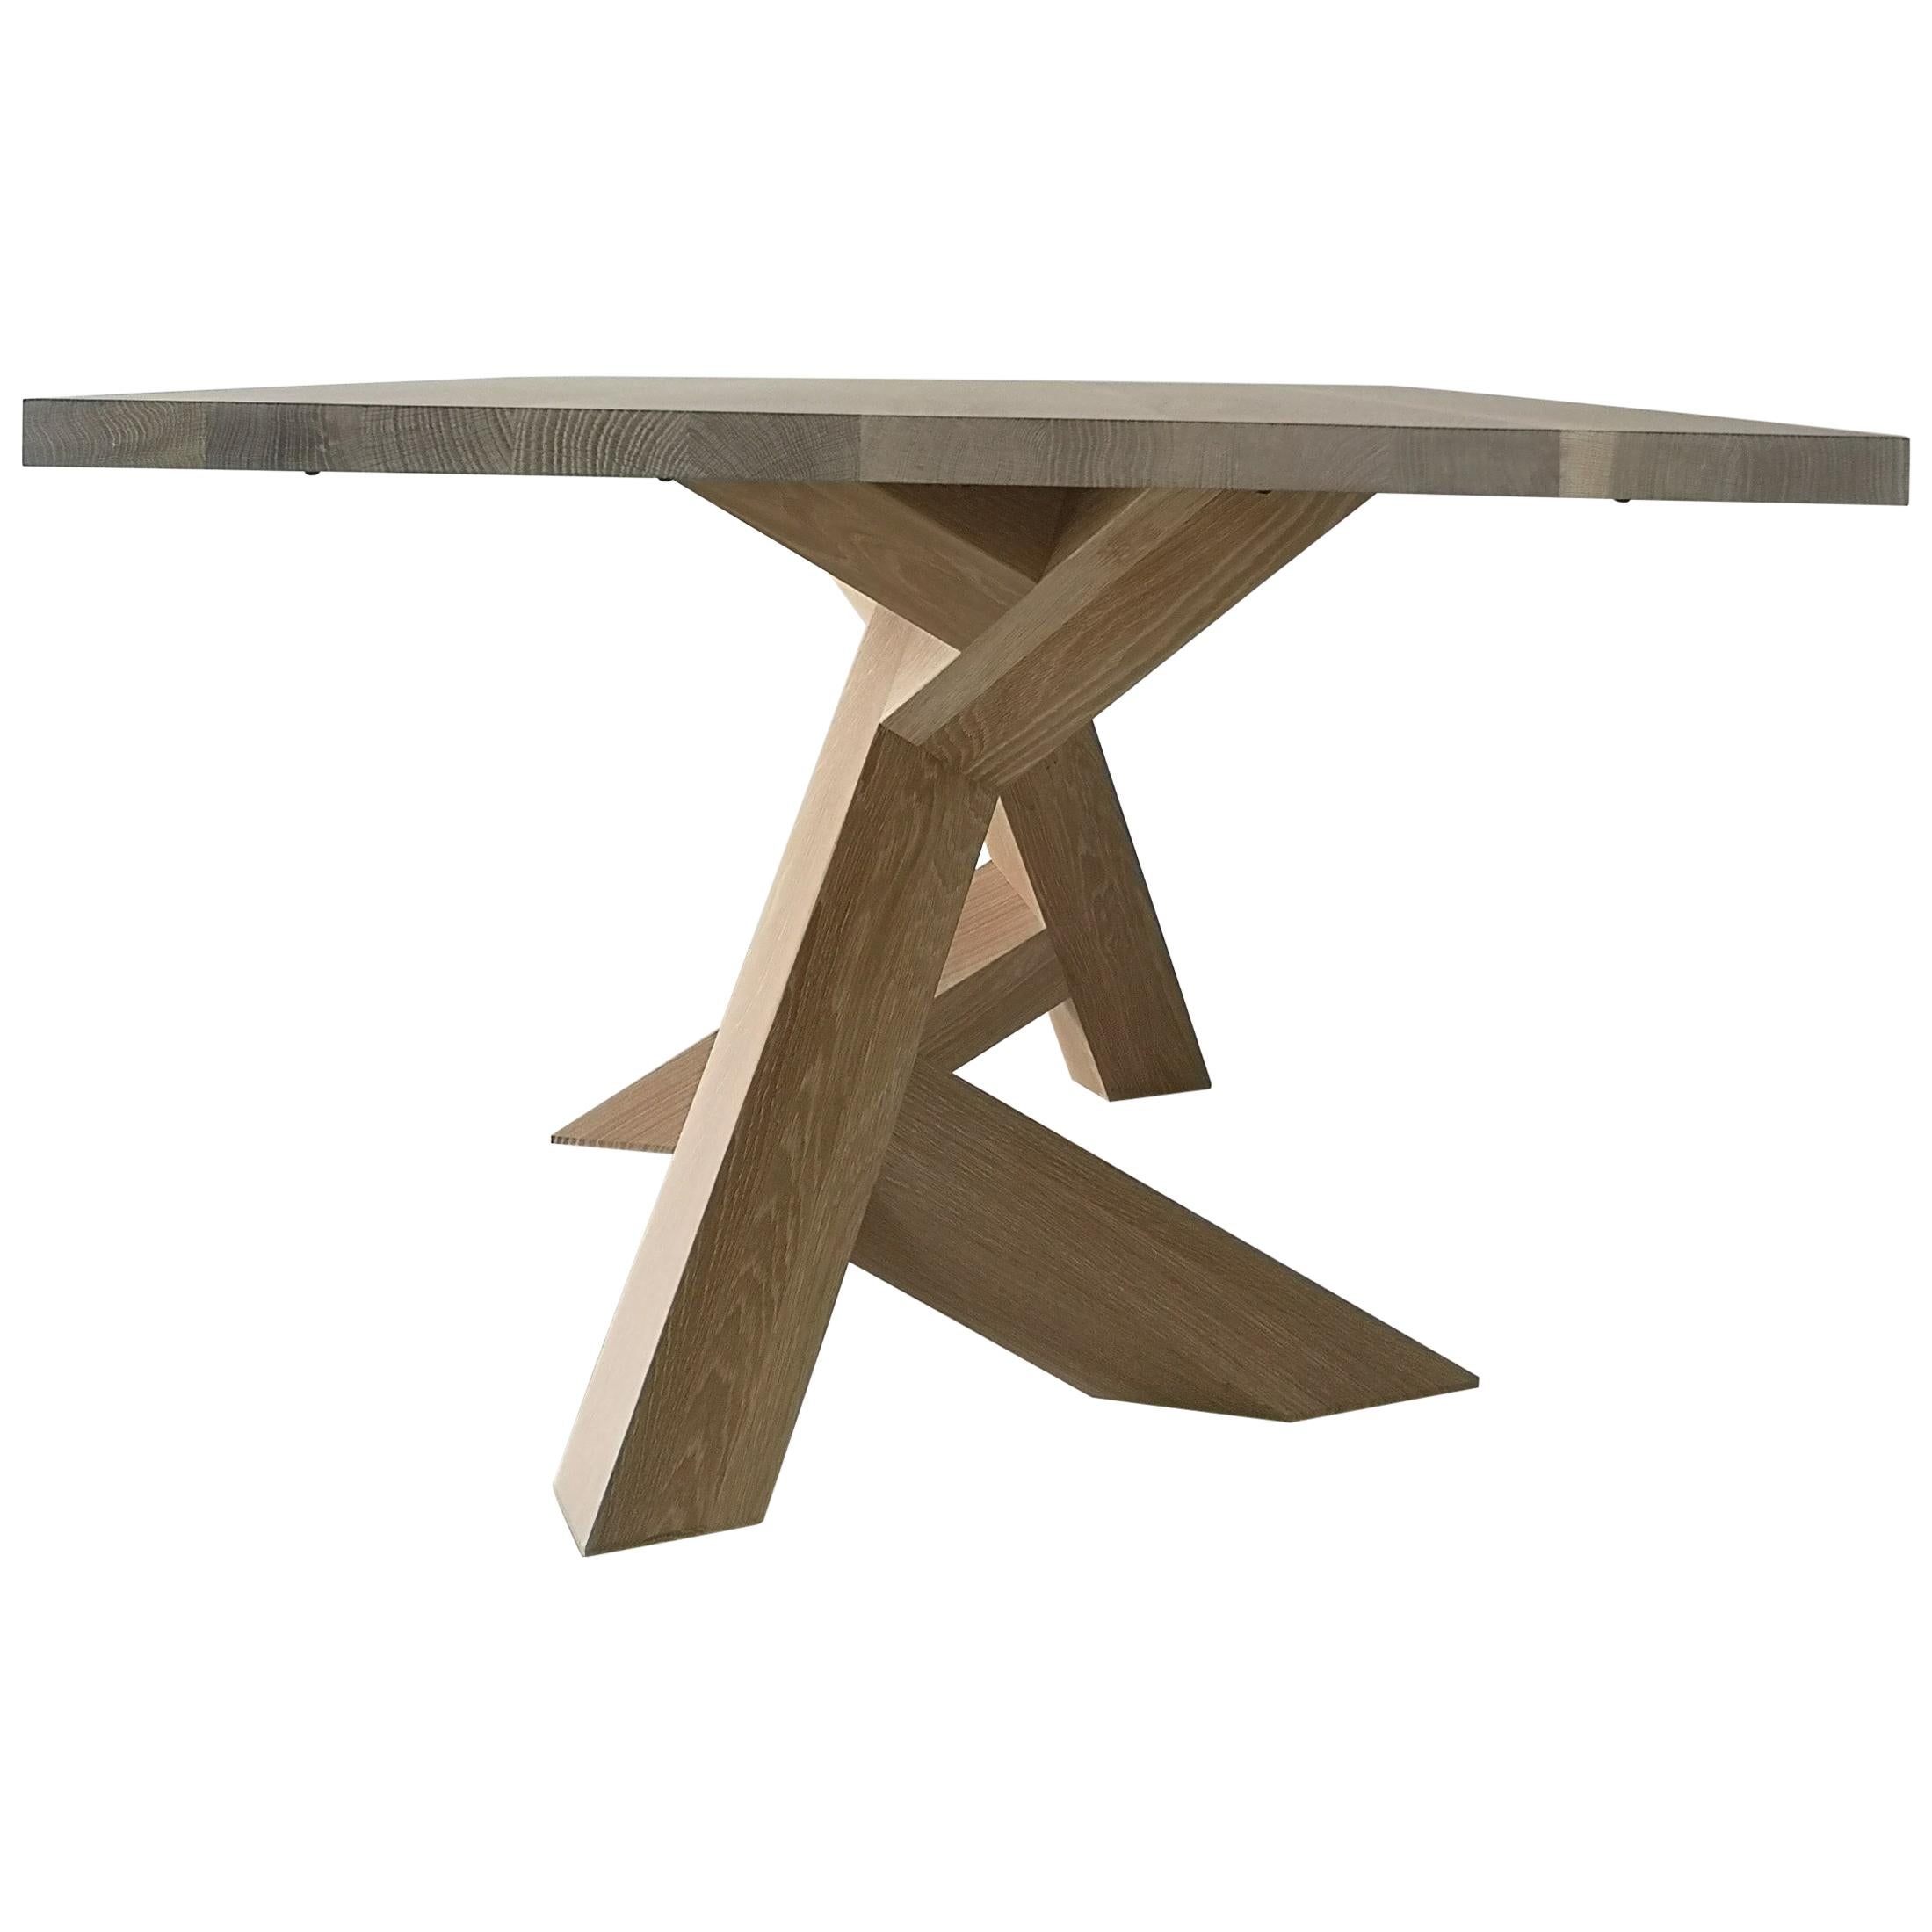 The Iconoclast dining table is made of 100% solid, hardwood and features a unique pedestal base. This piece commands attention and is the perfect centre piece for any open plan dining room, from modern to transitional, also makes a powerful